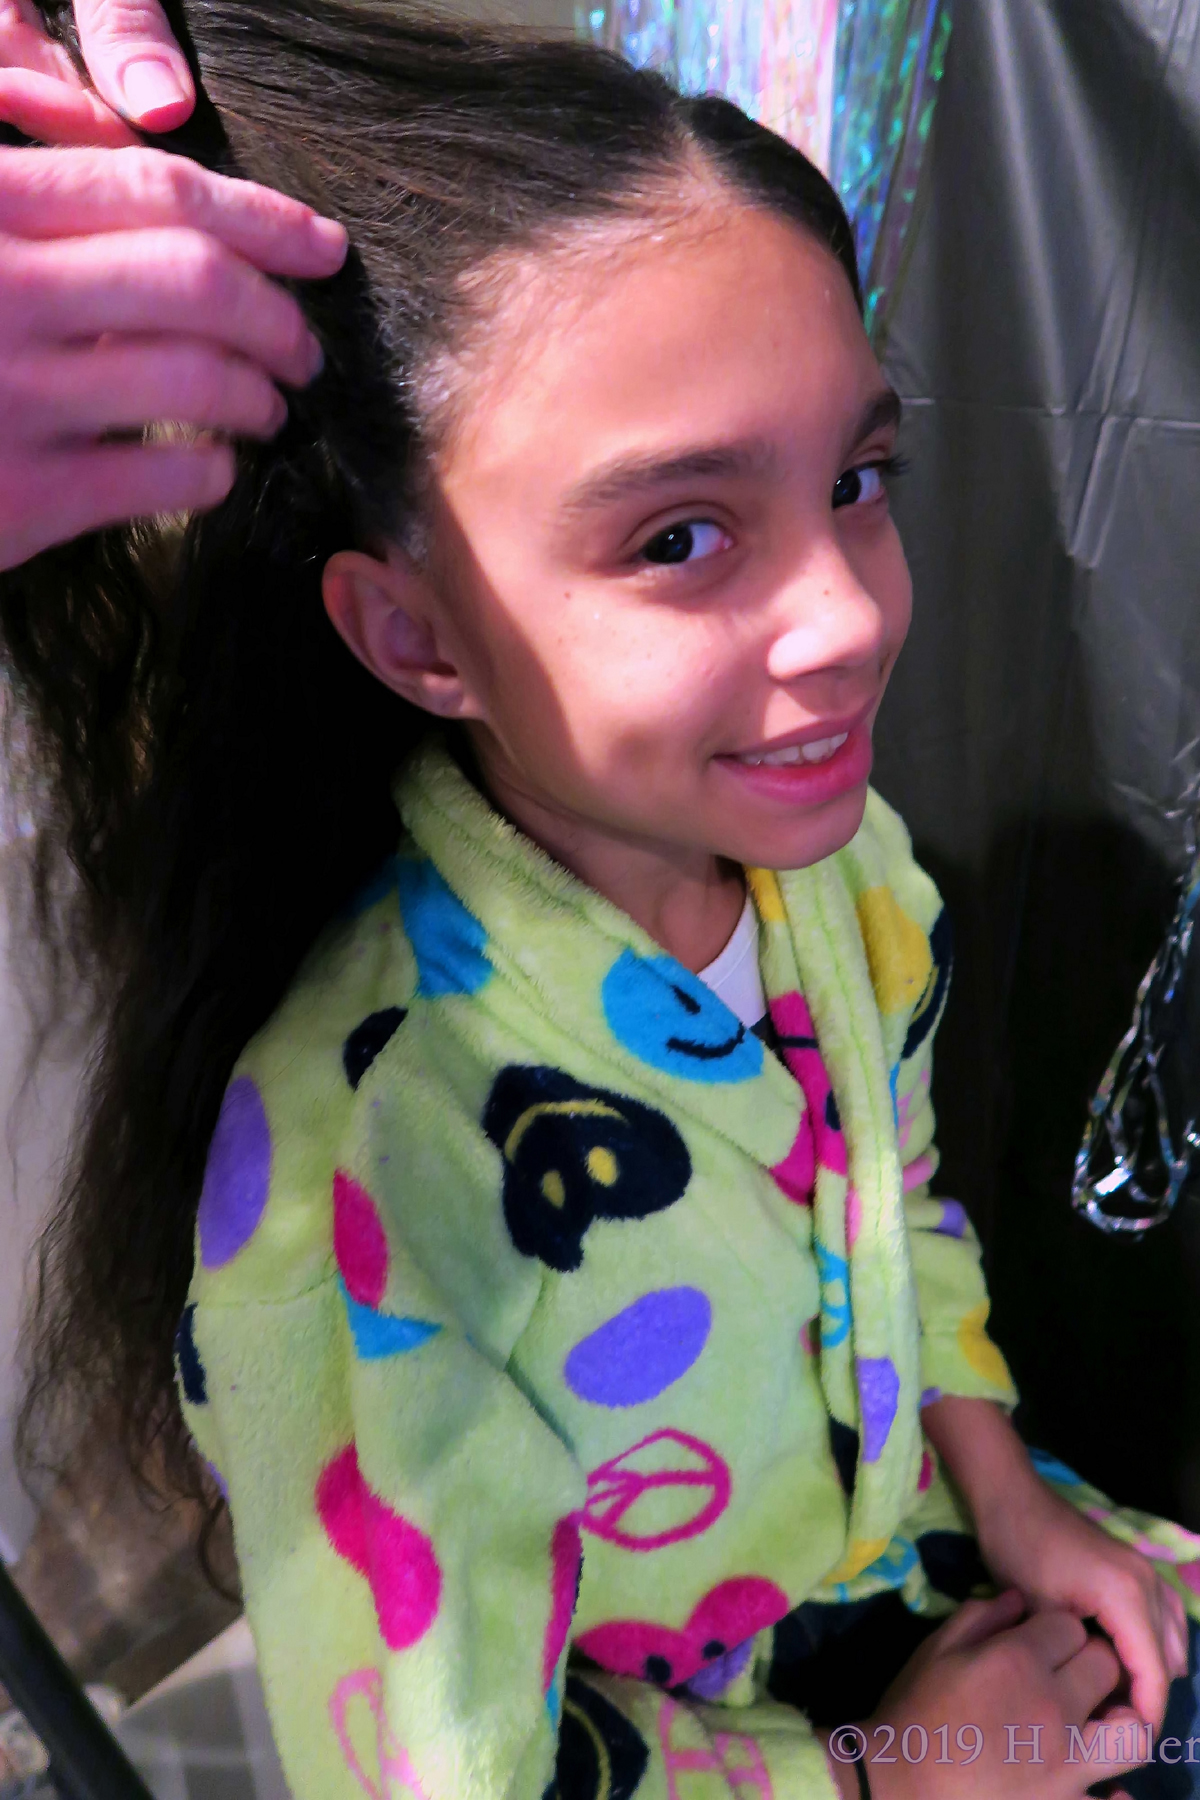 Beams For Braids! Kids Hairstyle On Spa Party Guest!